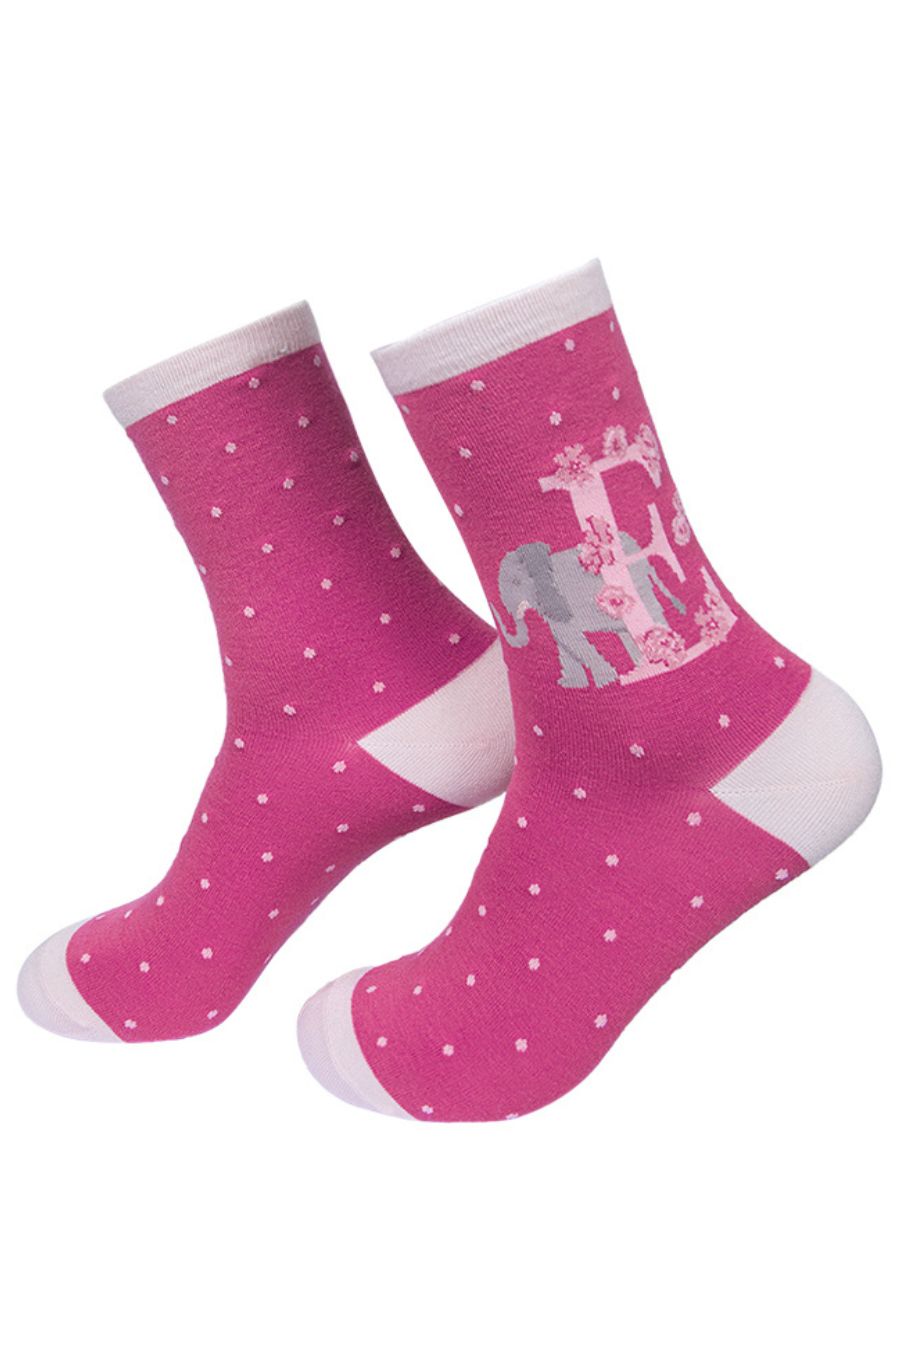 pink socks with a large letter e, an elephant and a floral pattern on the ankle